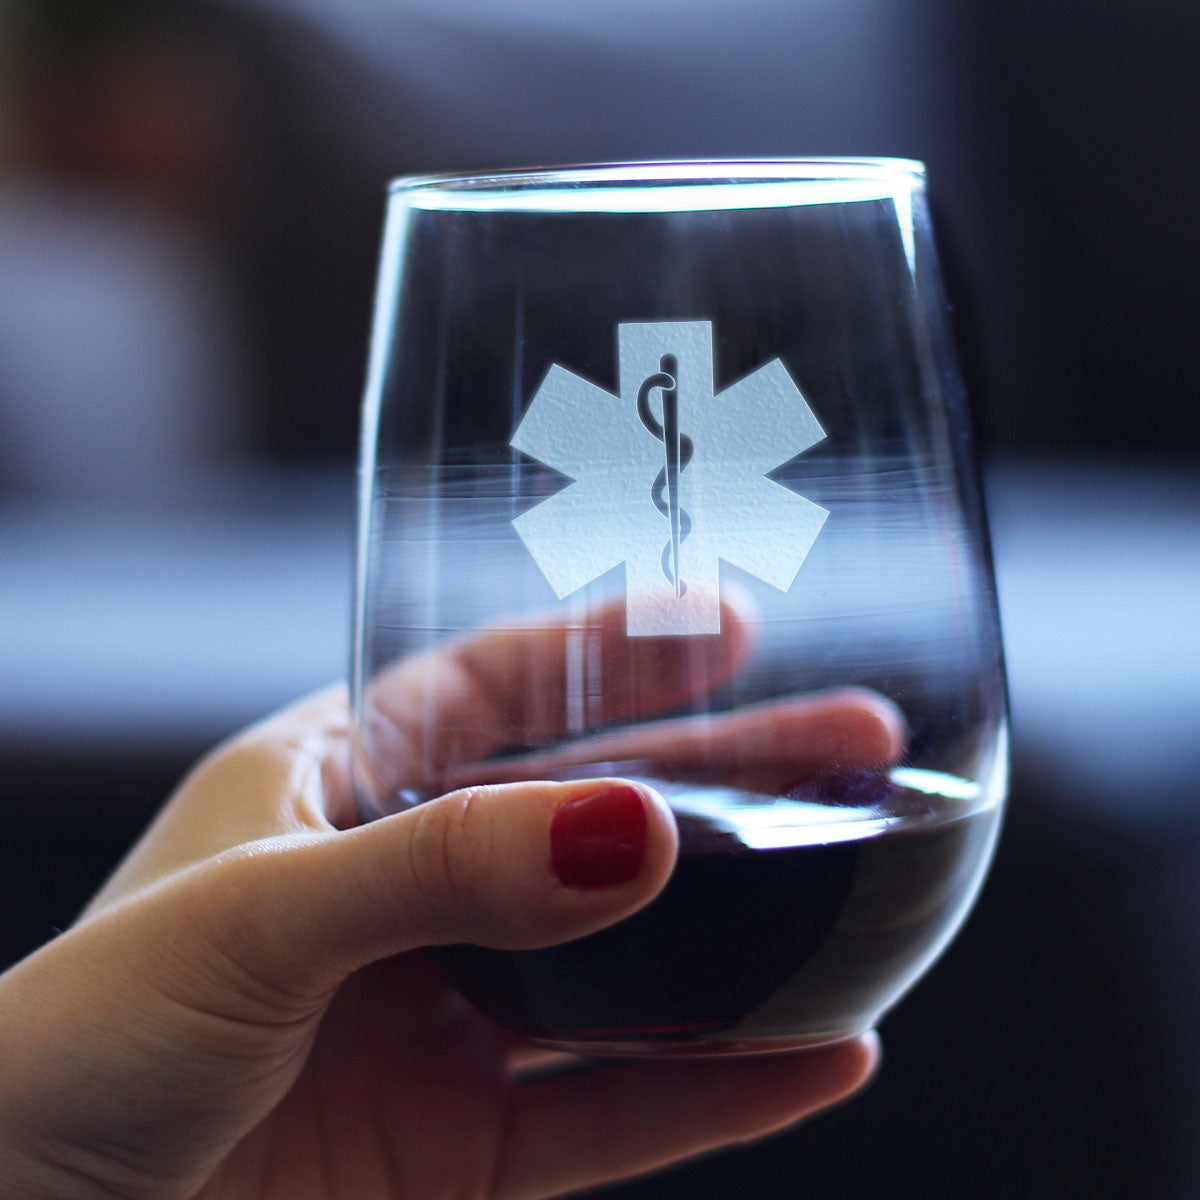 EMT Star of Life Stemless Wine Glass - EMS Themed Gifts for Paramedics and EMTS - Large 17 oz